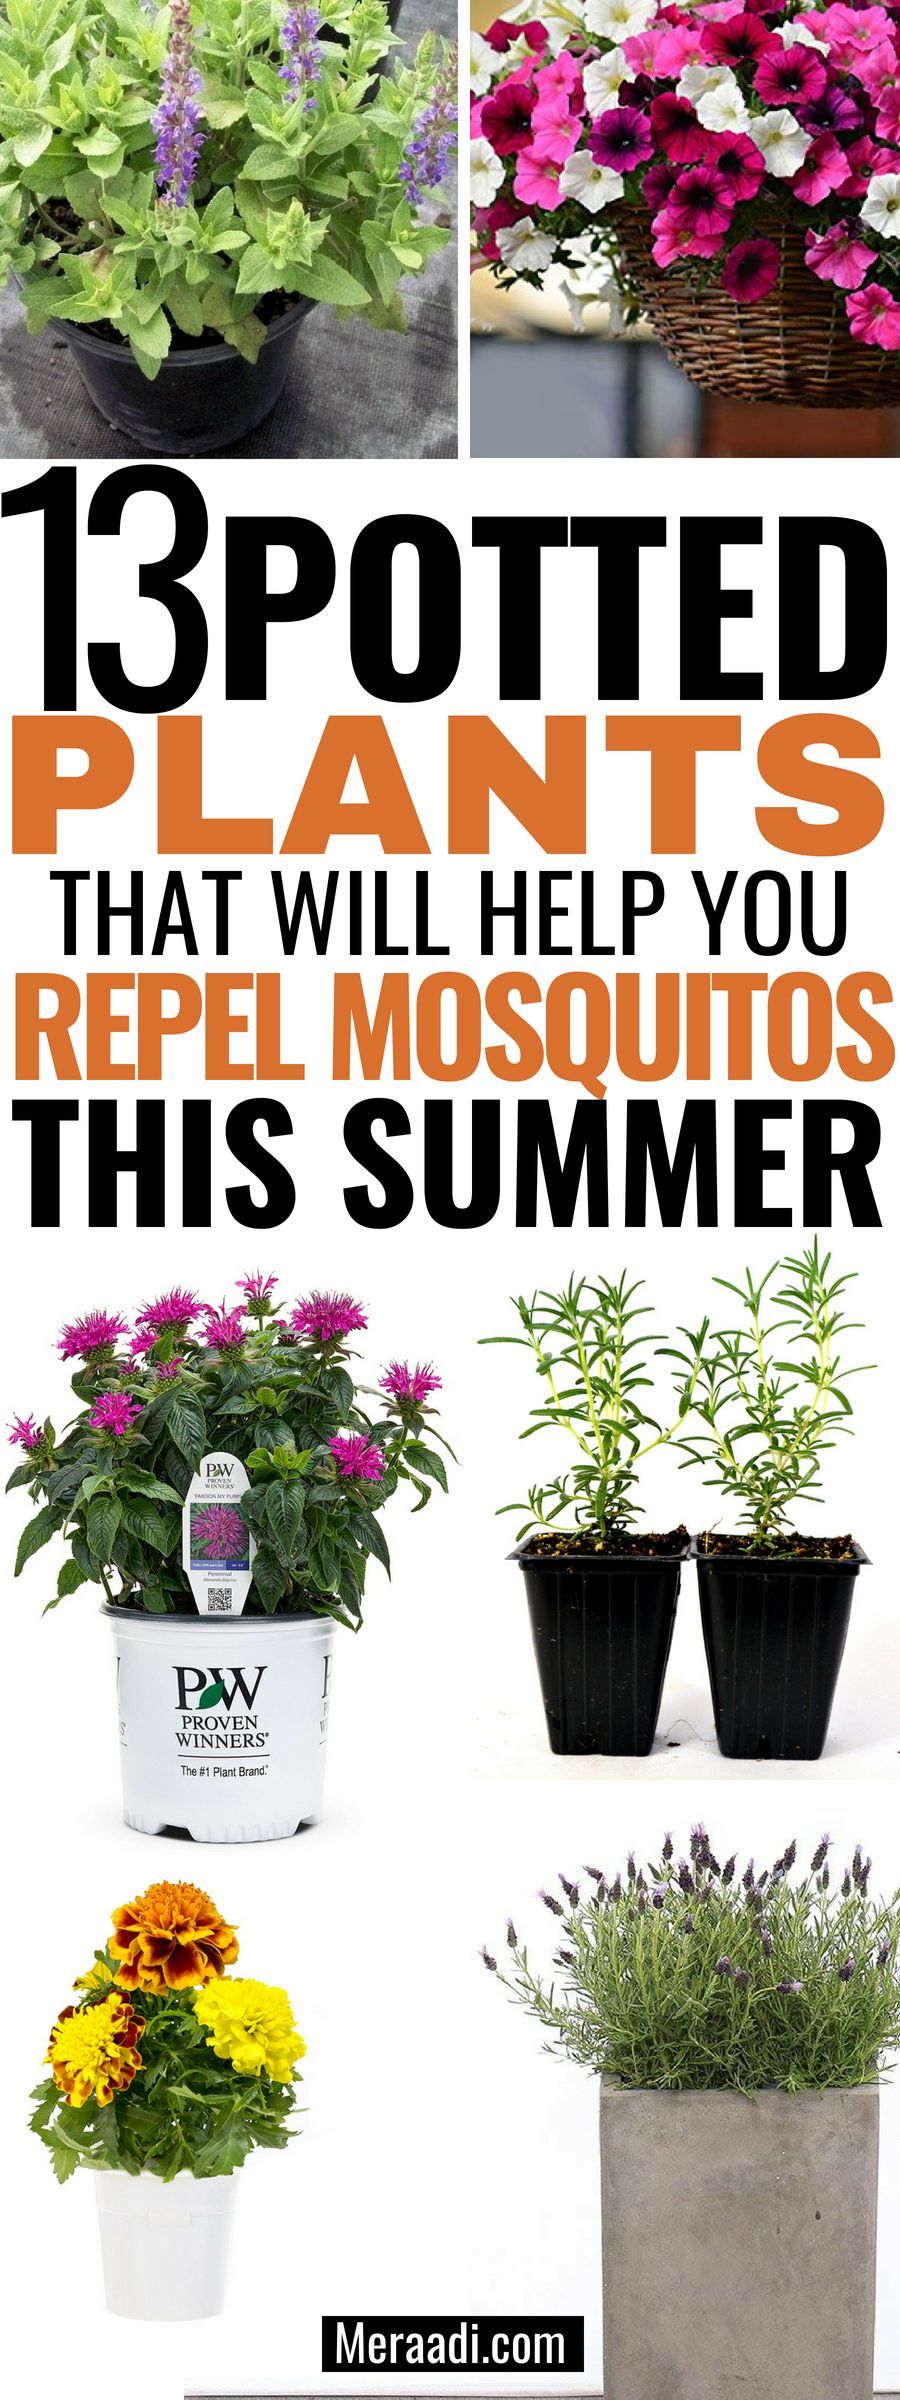 13 Potted Plants That Repel Mosquitos -   18 plants That Repel Mosquitos patio ideas